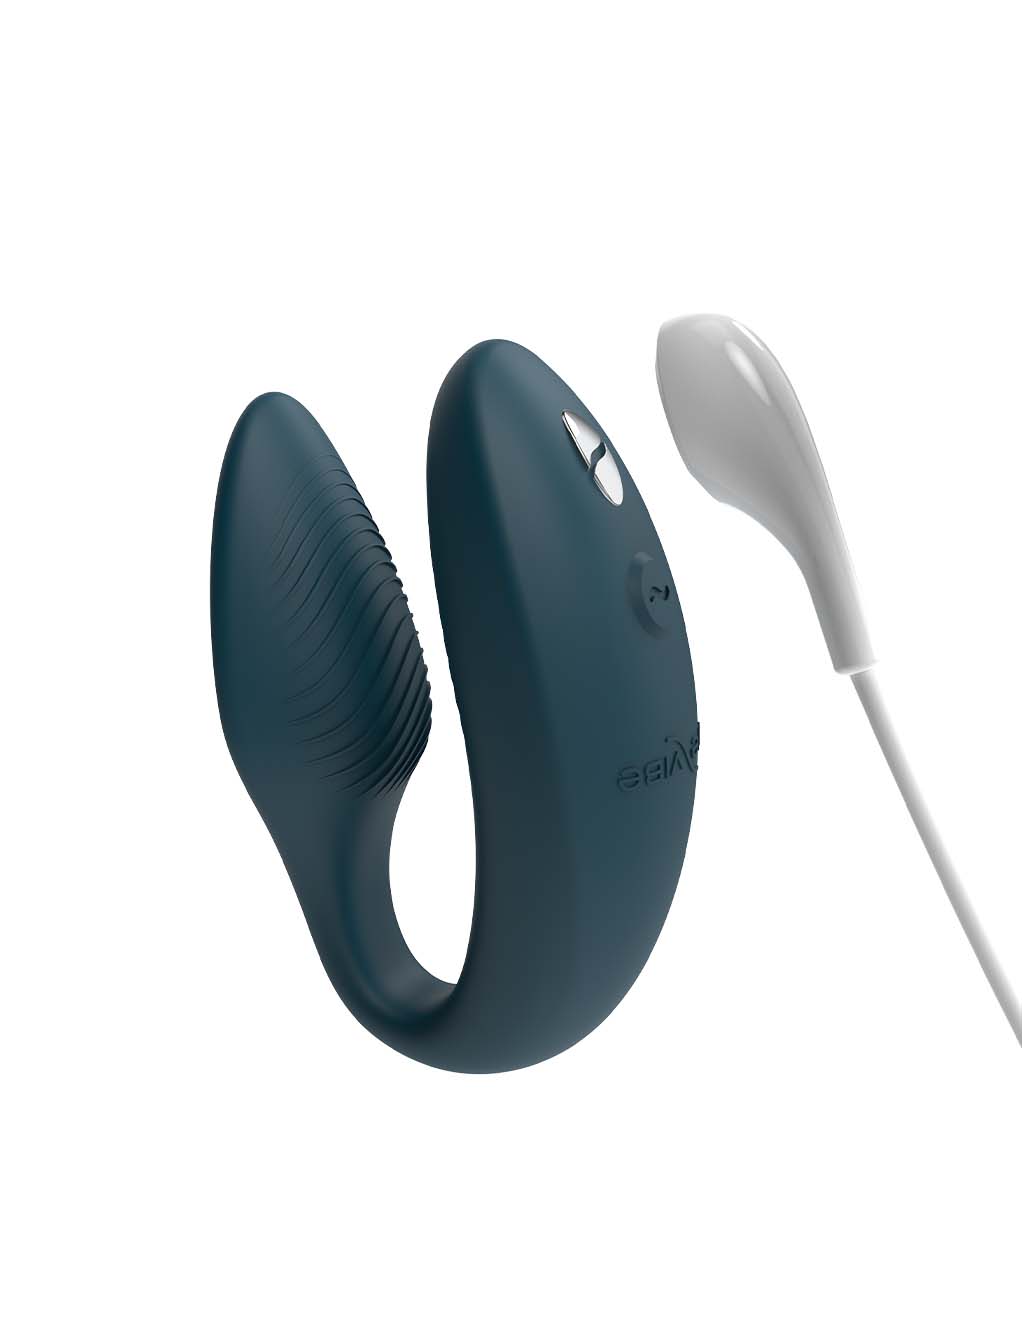 We-Vibe Sync 2- chargers